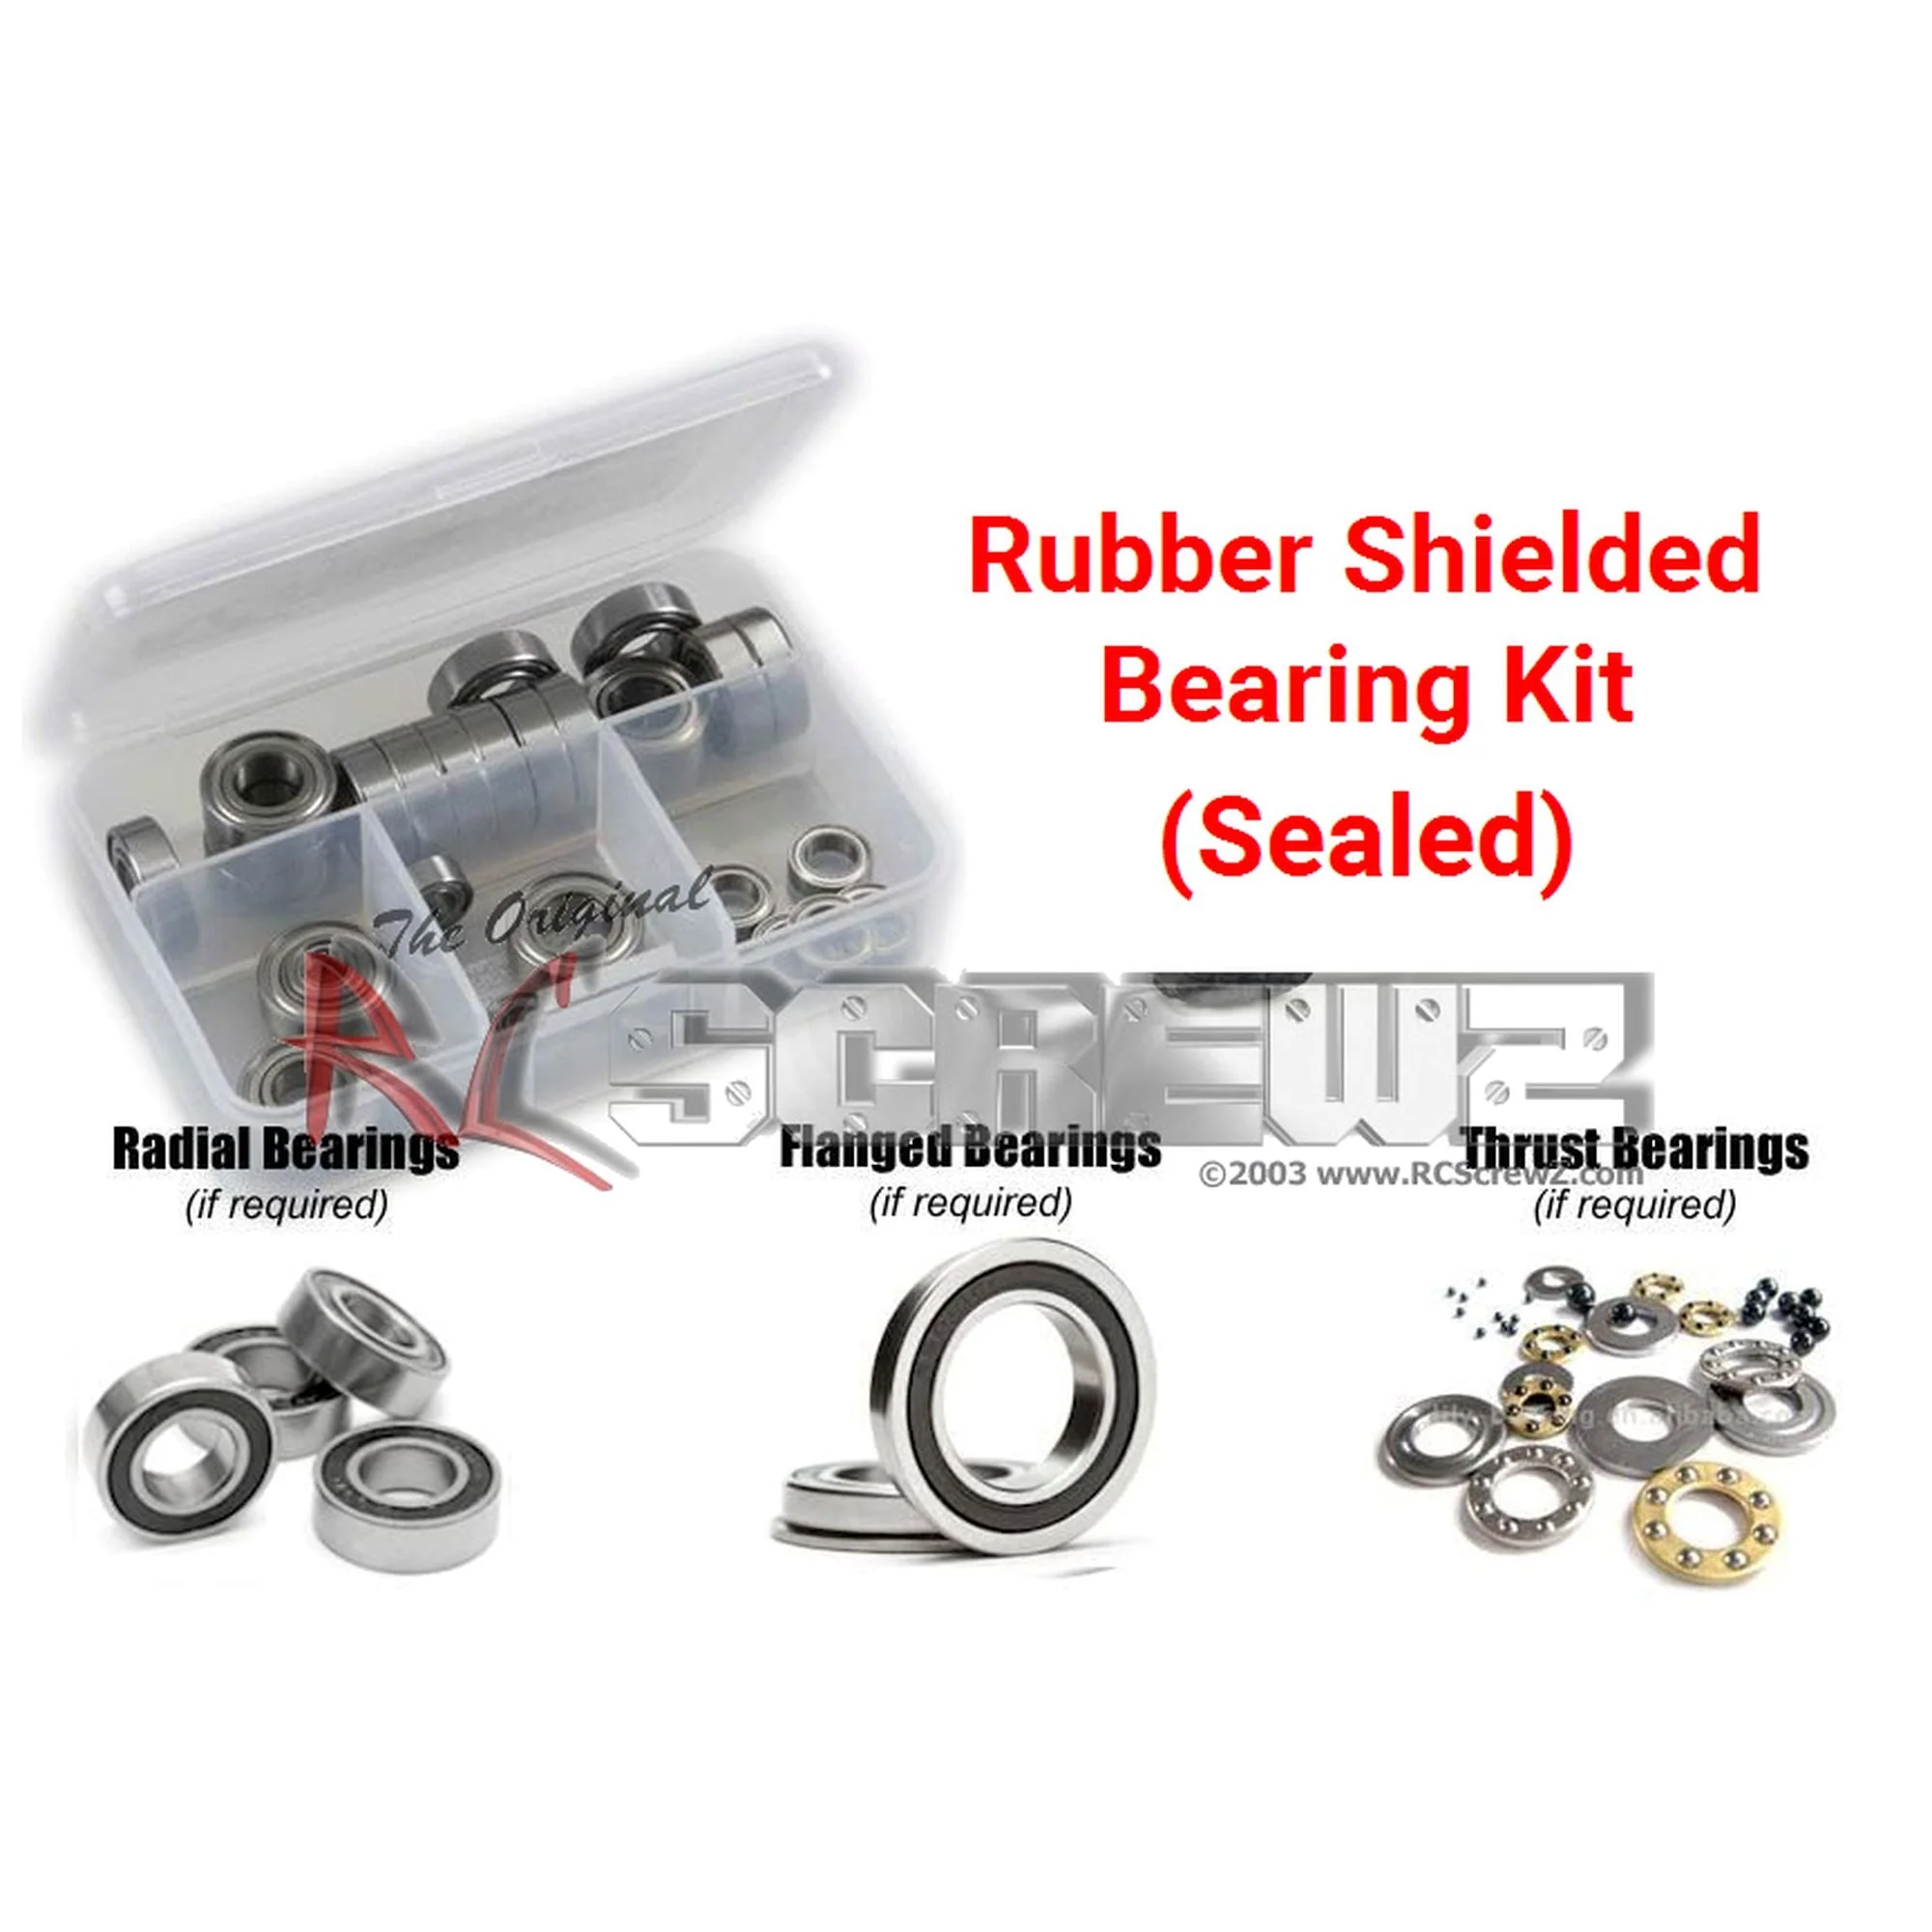 RCScrewZ Rubber Shielded Bearing Kit xra054r for XRAY RX8 2013 #340002 - Picture 1 of 12